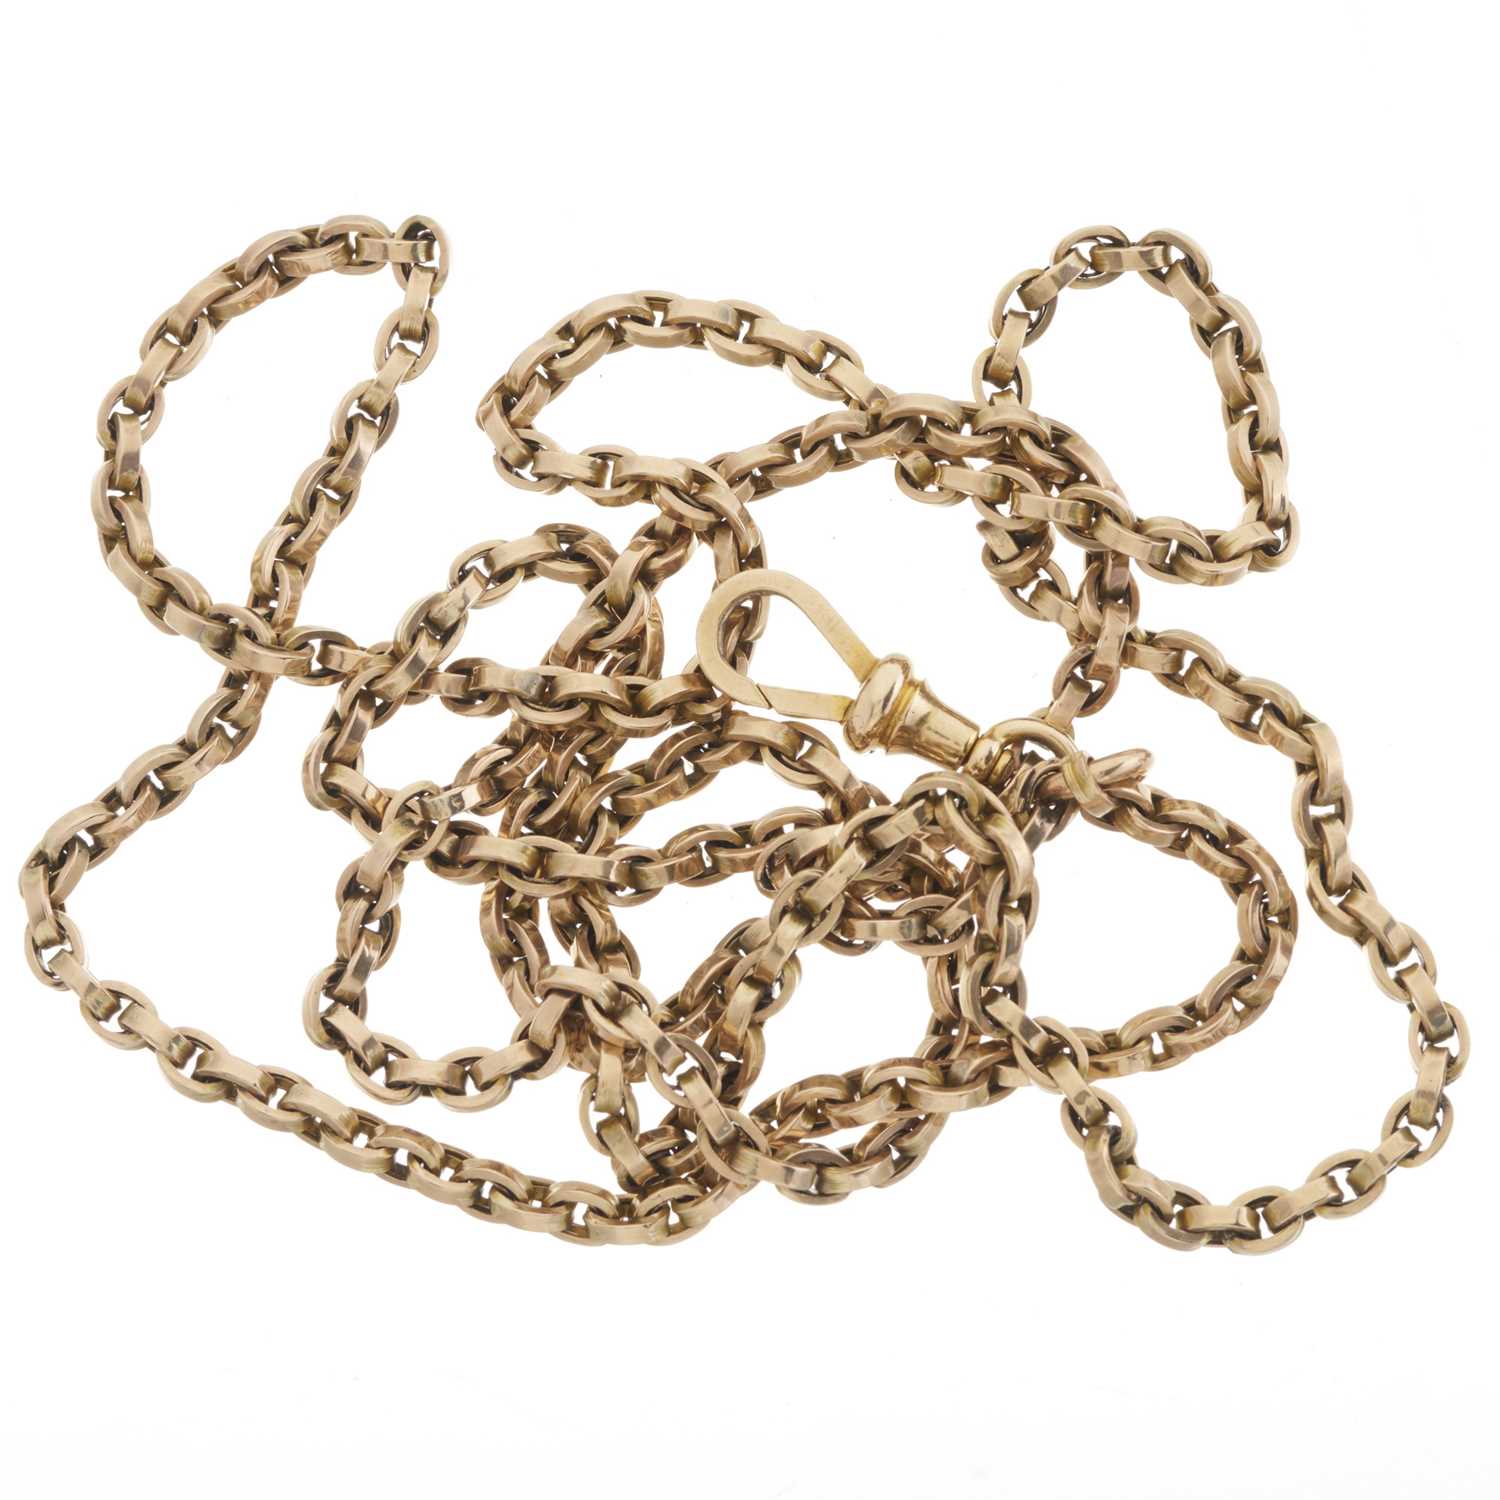 An early 20th century 10ct gold longuard chain necklace - Image 2 of 2